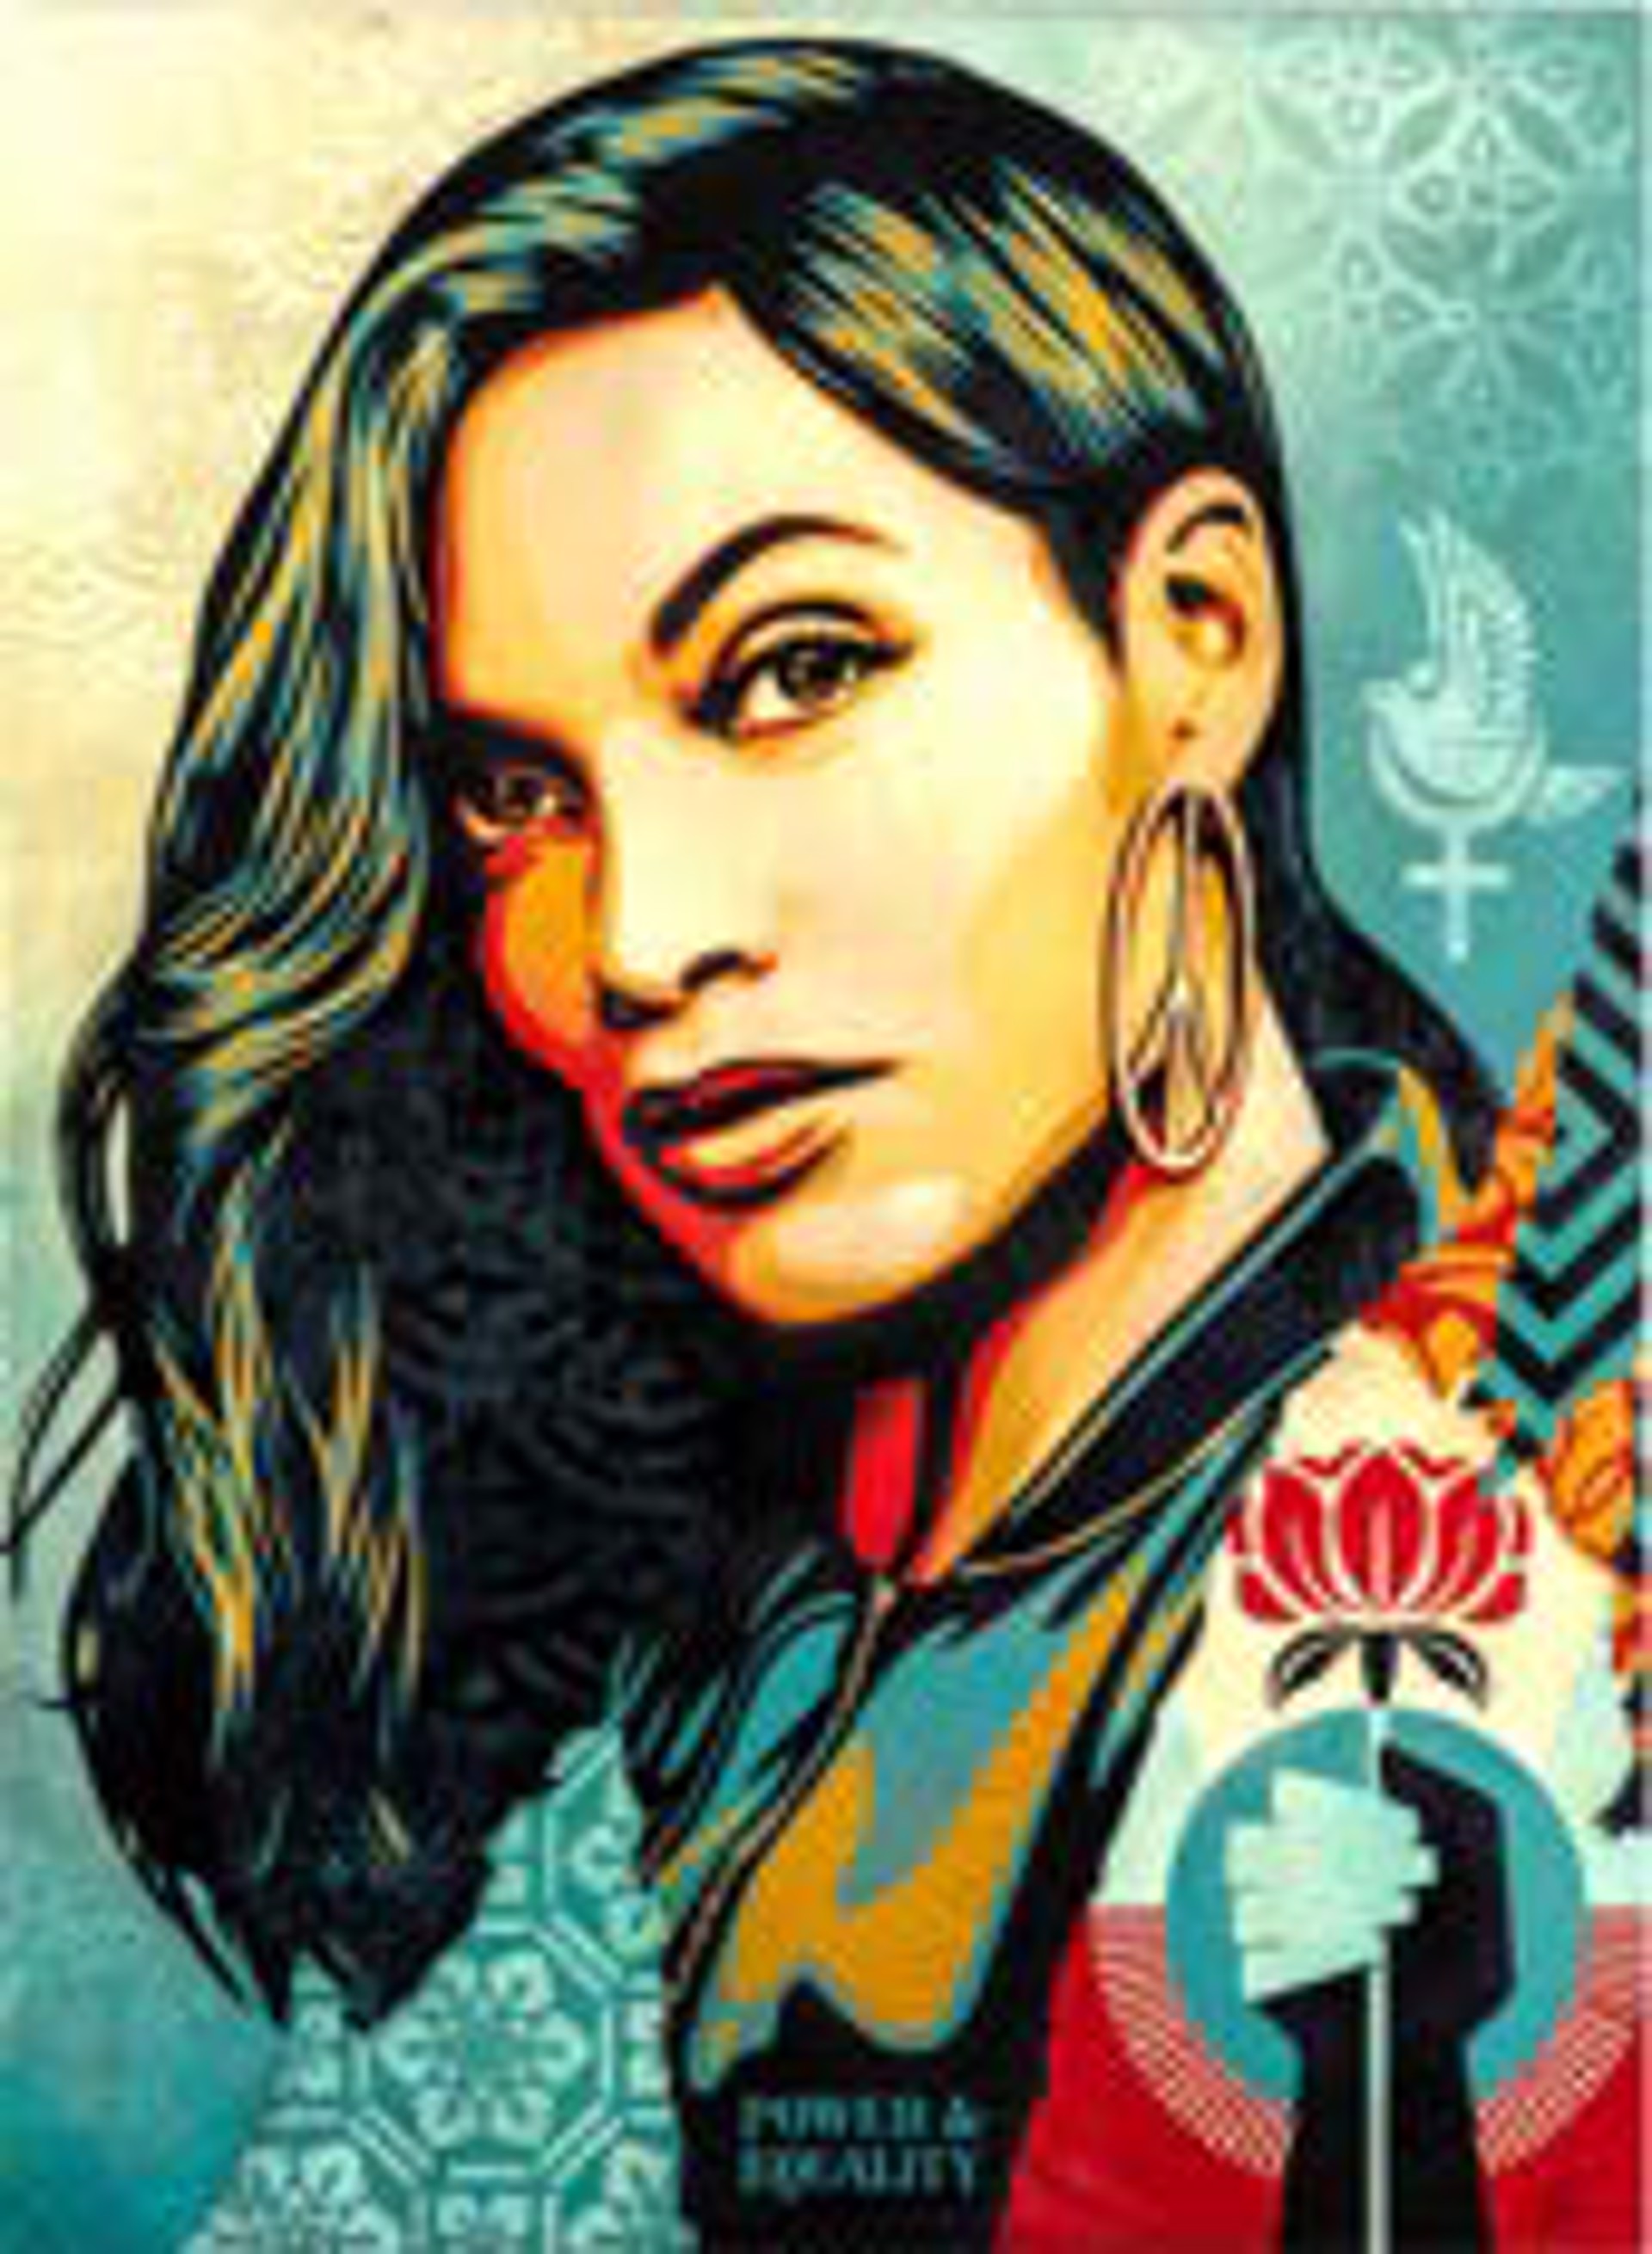 Power & Equality by Shepard Fairey